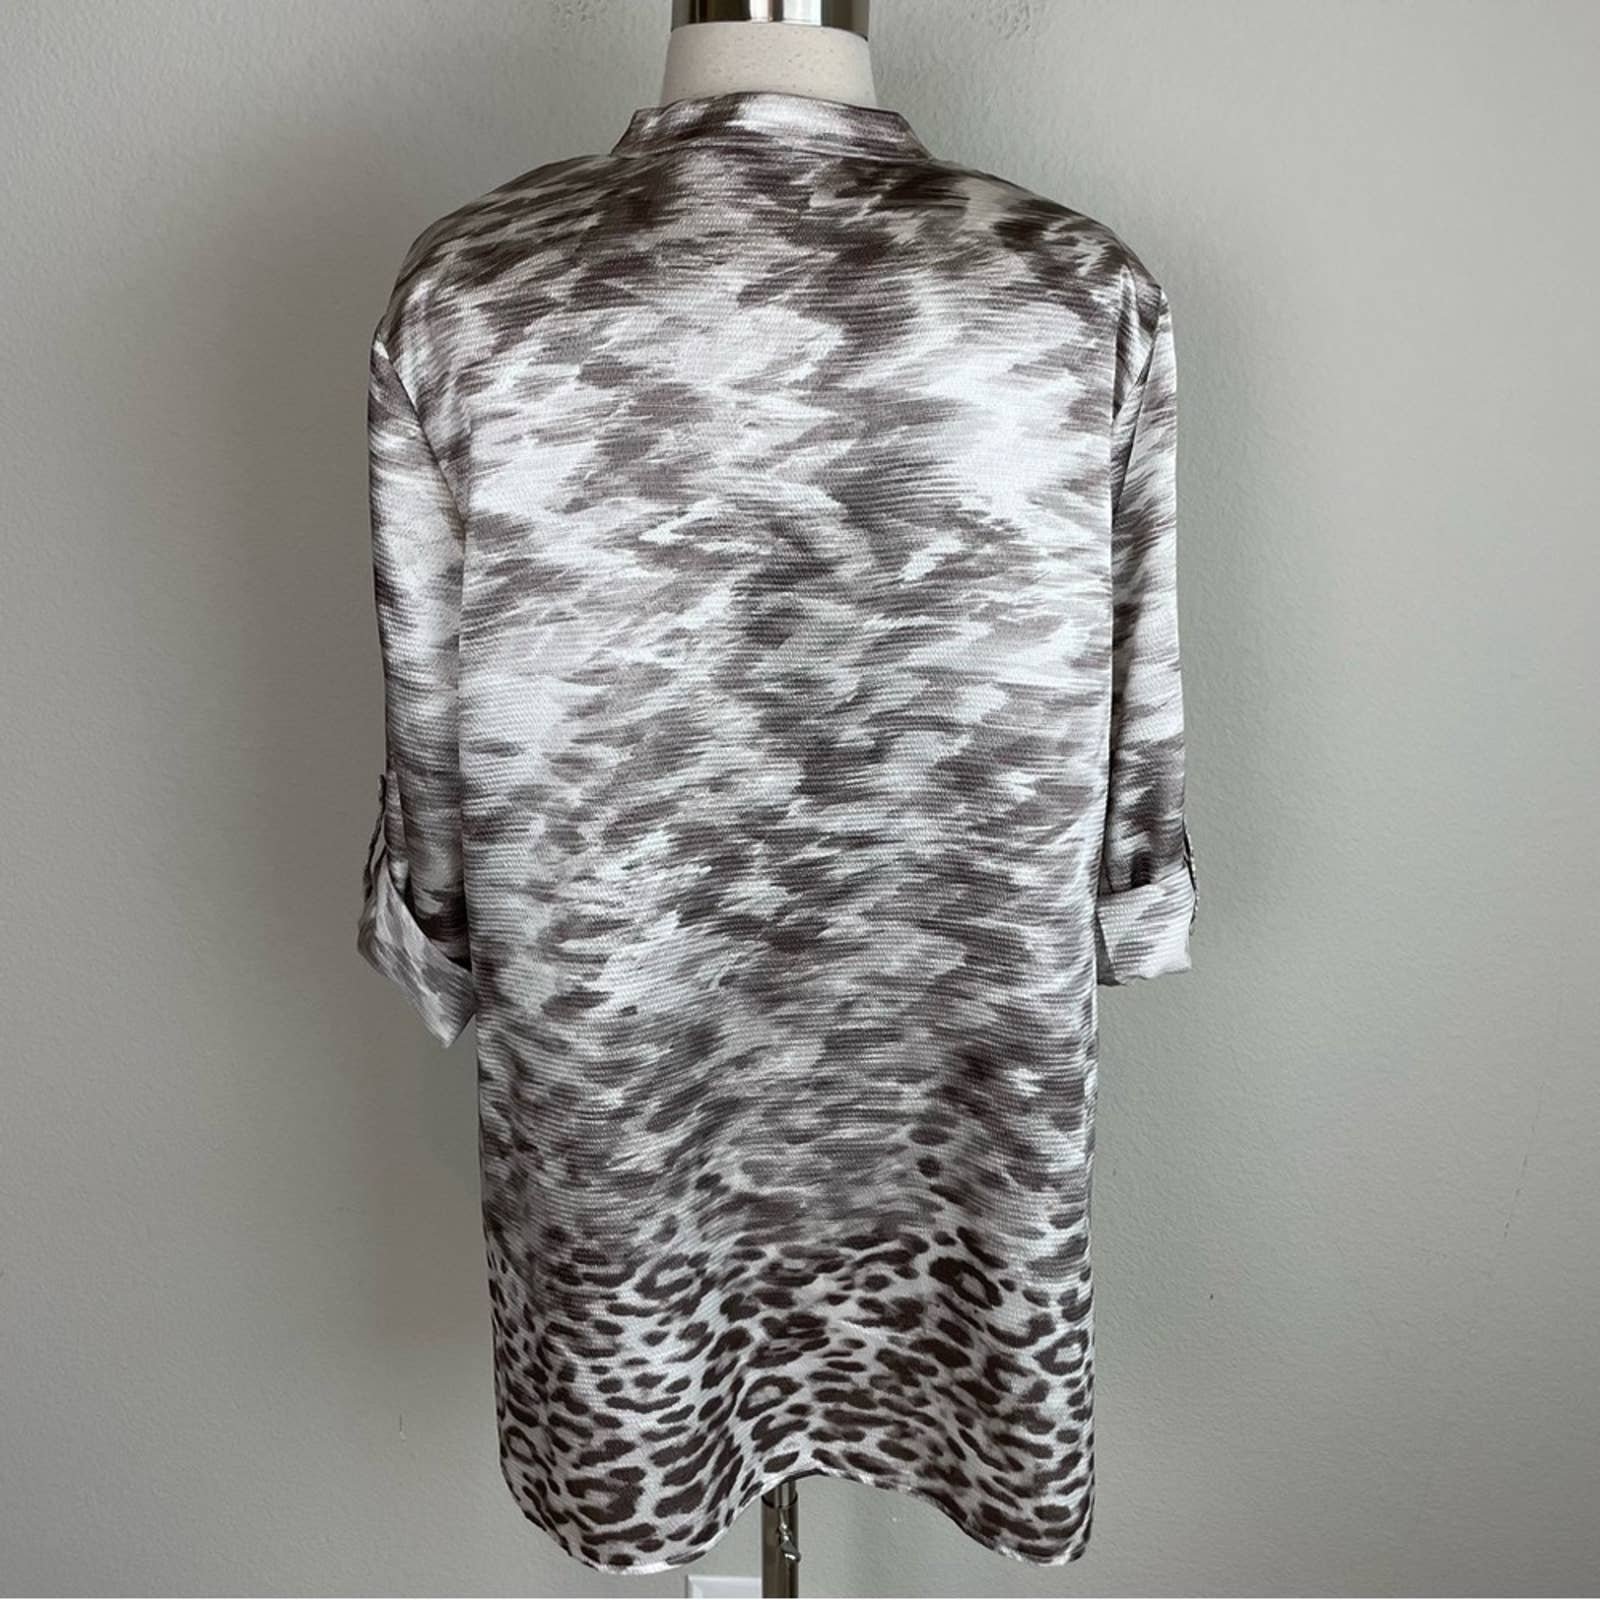 the Lowest price Chico´s Travelers Brown Tan Animal Print 3/4 Sleeve Tunic Top 2 KbCtiQNNB Hot Sale